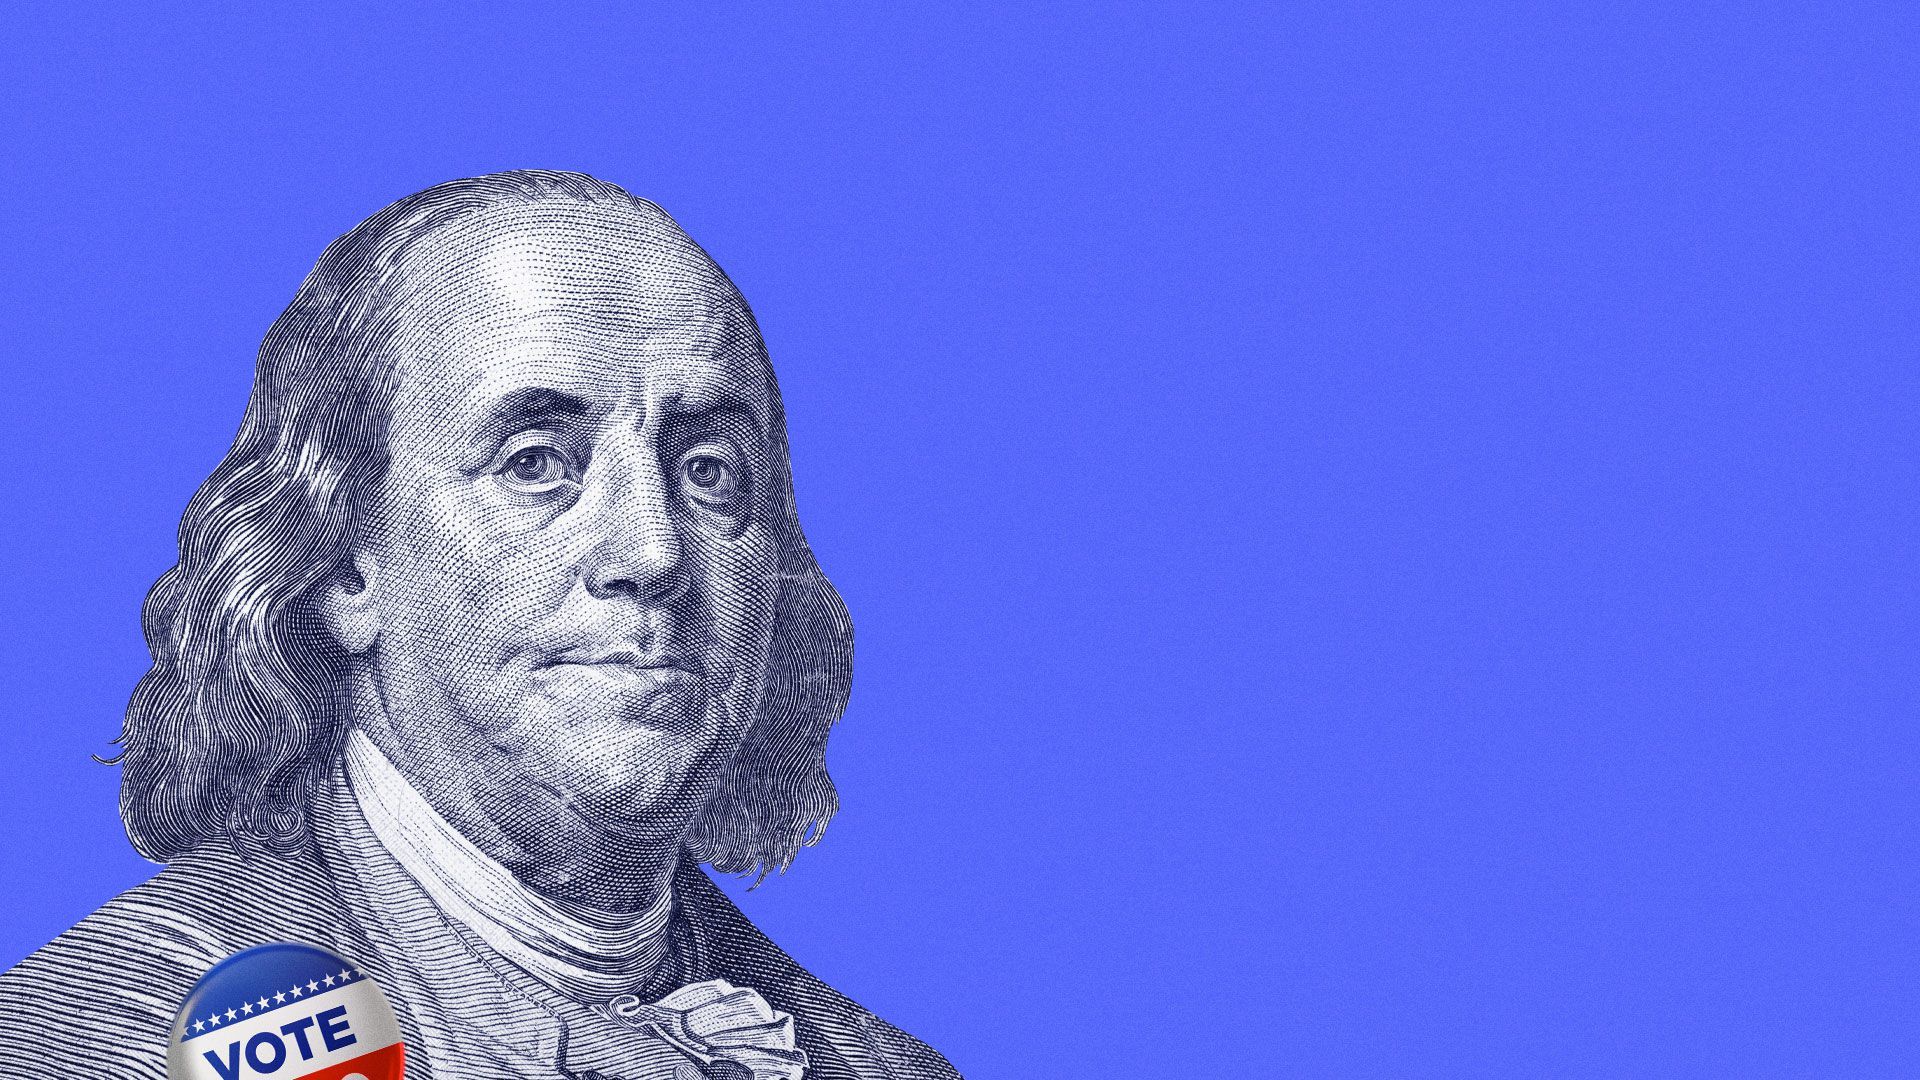 Illustration of Benjamin Franklin with a vote button